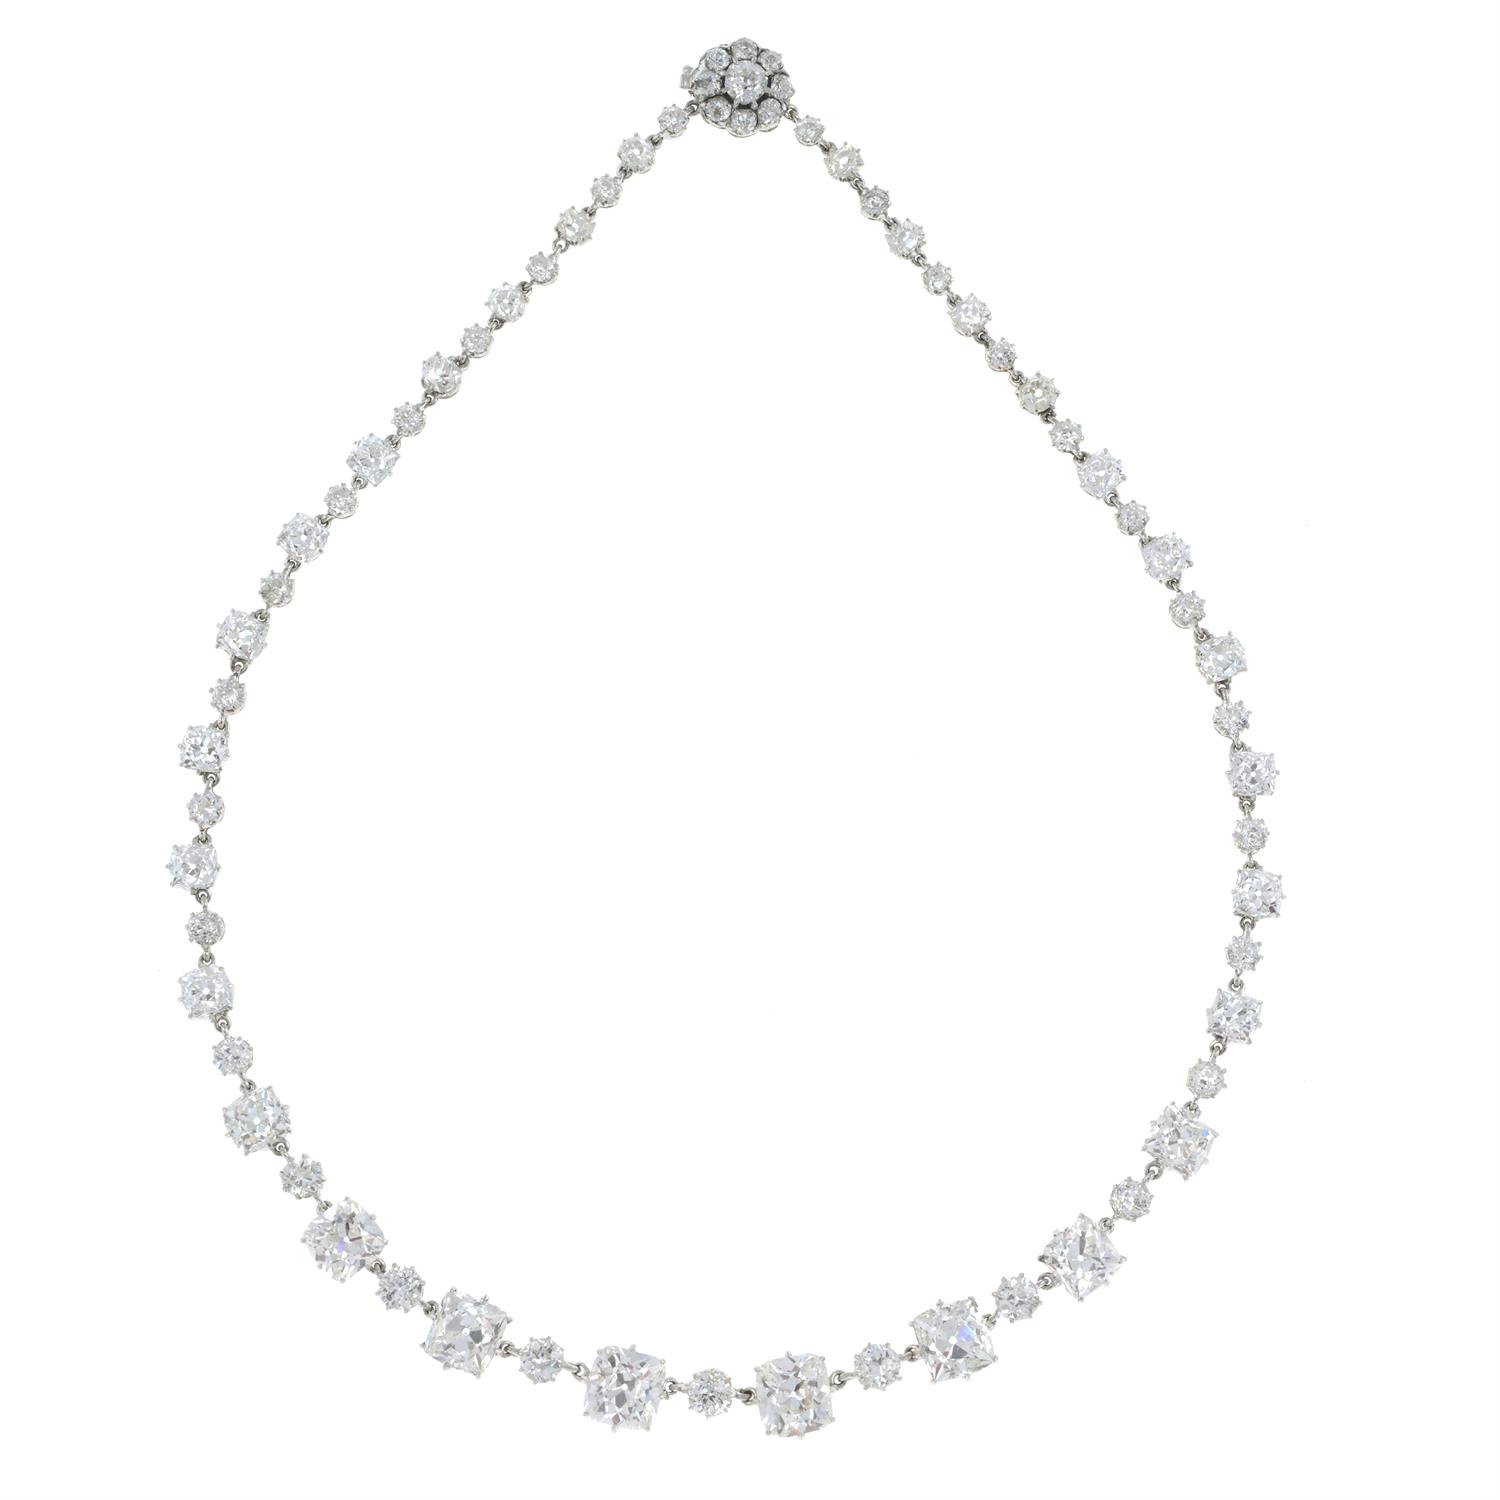 Early 20th century graduated diamond line necklace - Image 2 of 7